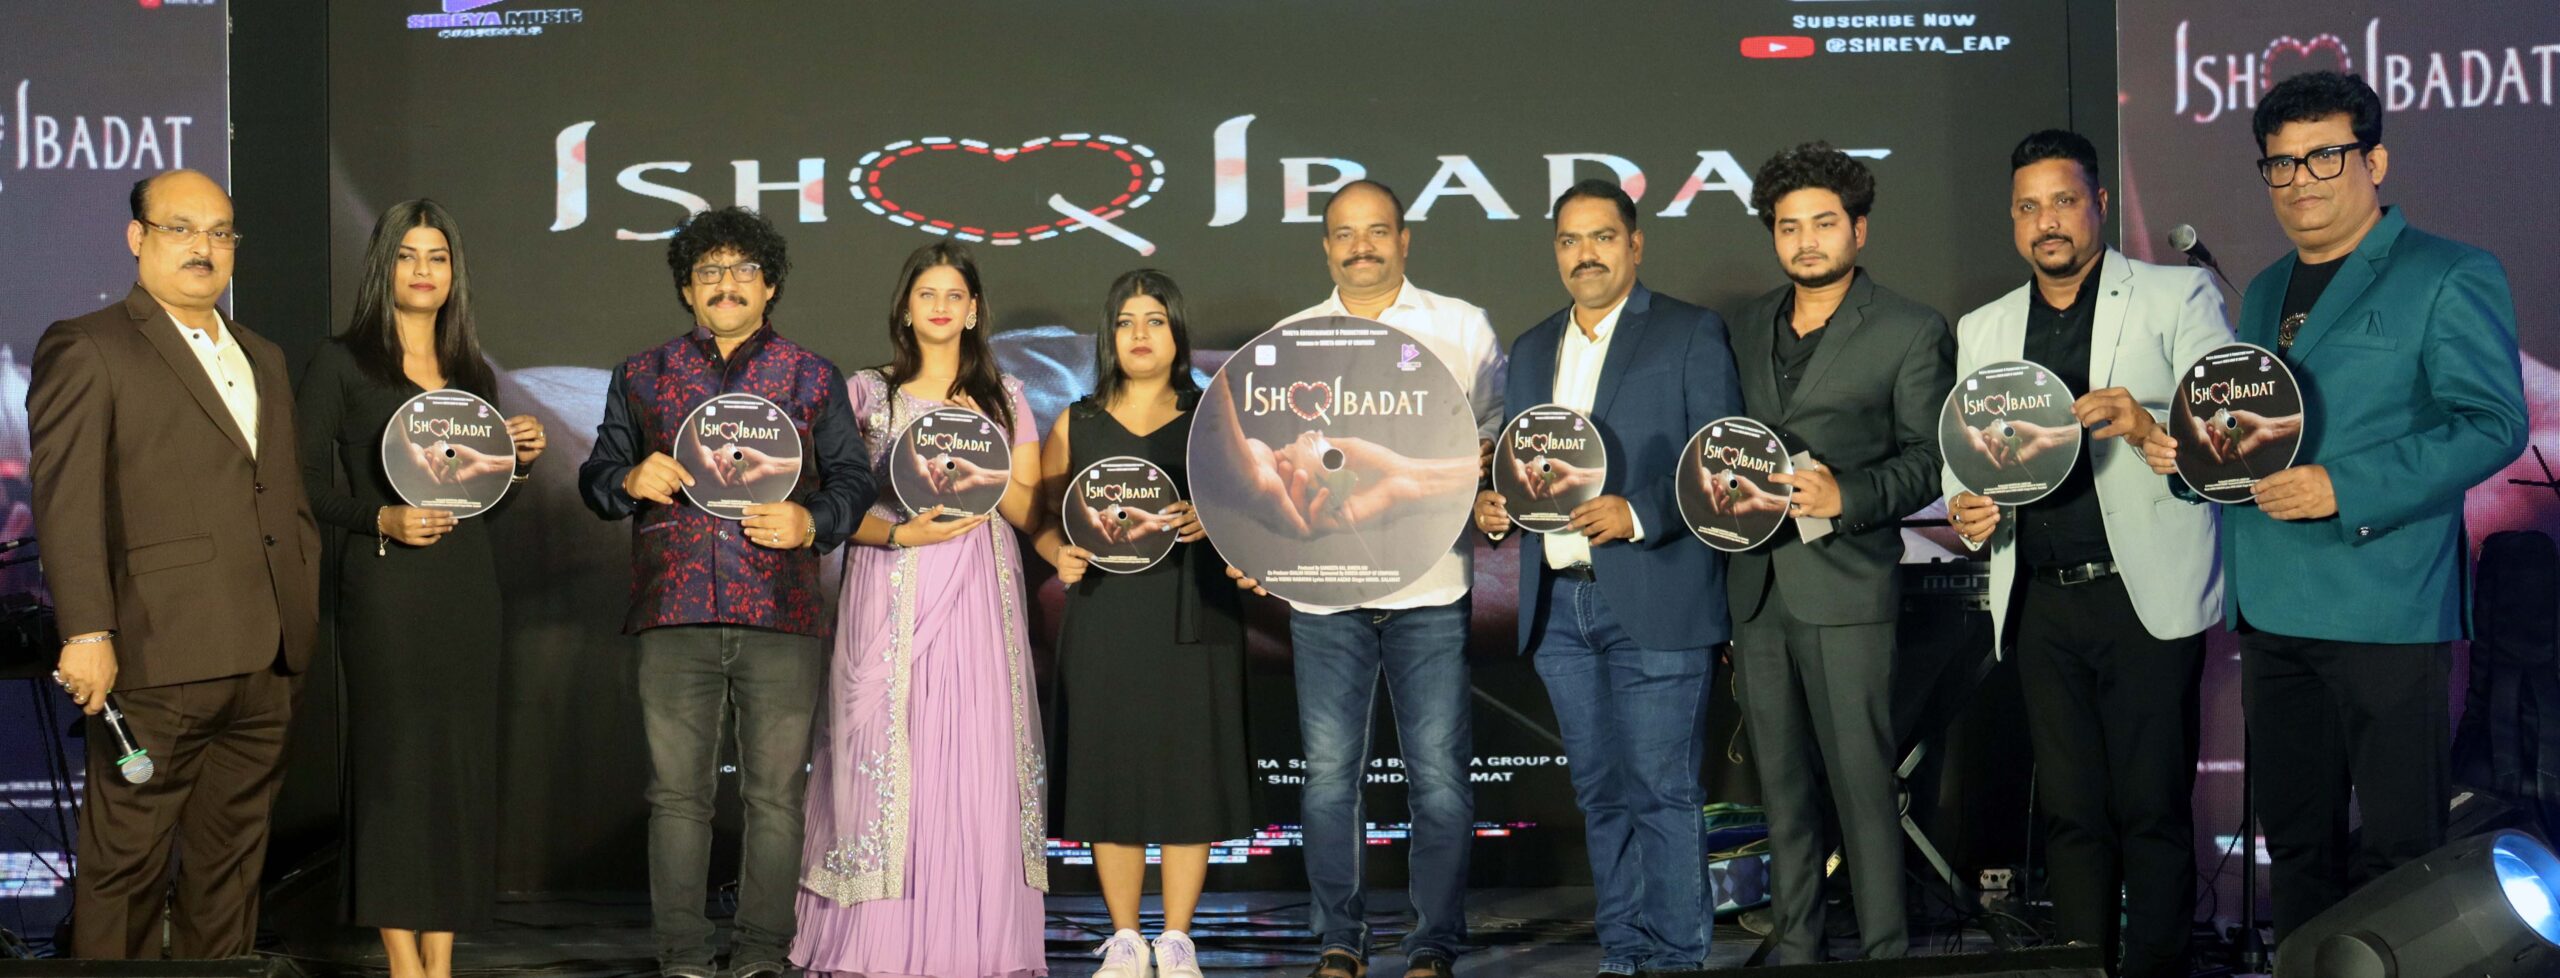 Shreya Entertainment and Productions Celebrates Six Months of Tremendous Success in the Music Industry